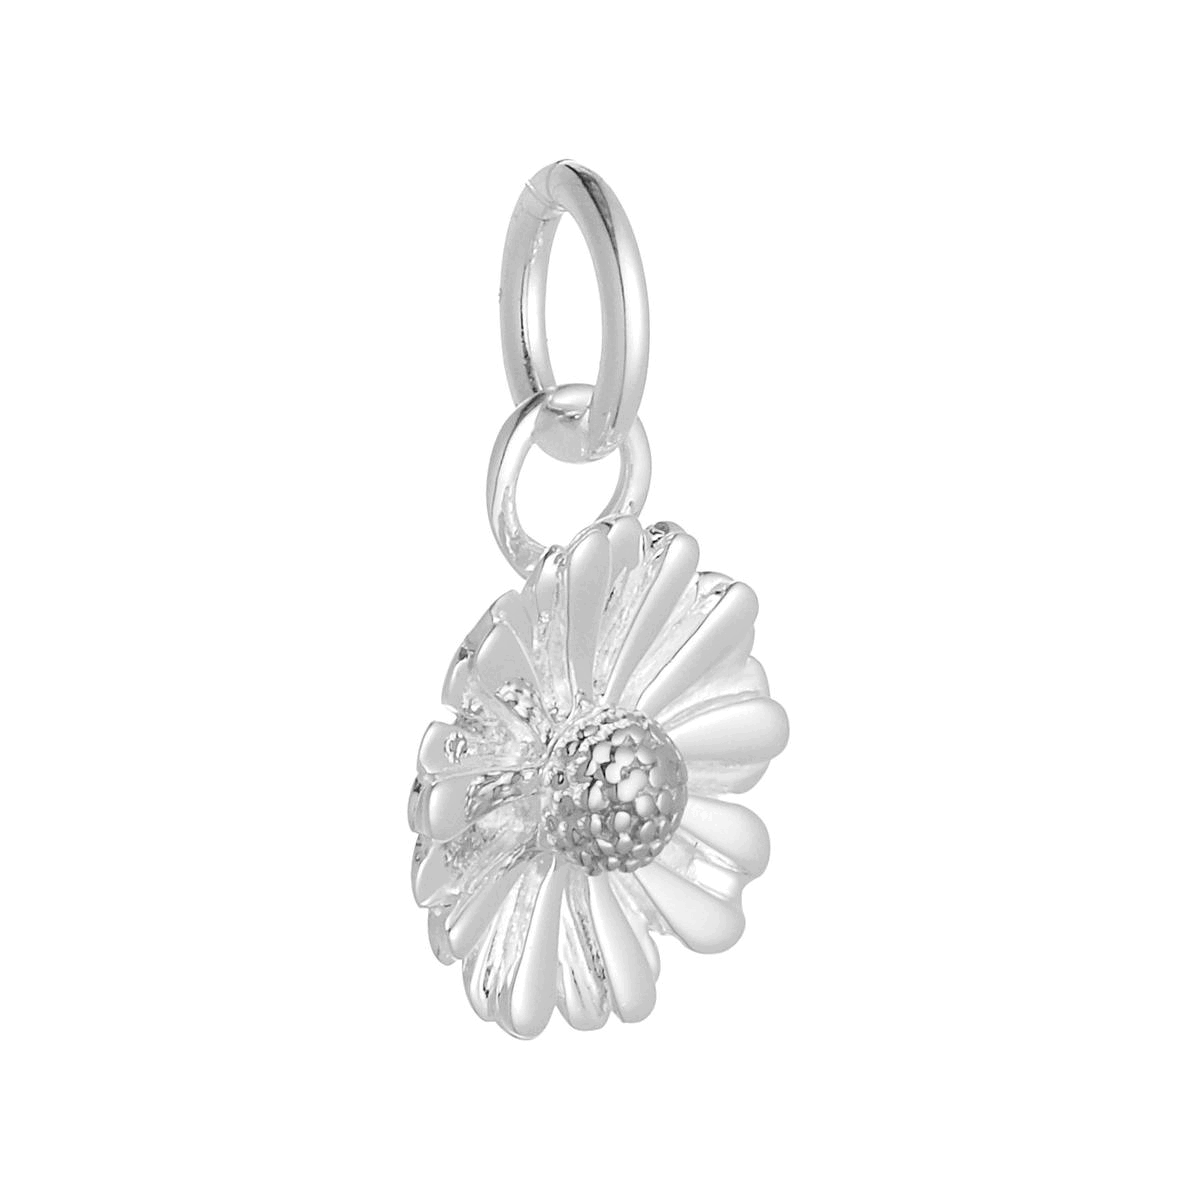 solid silver daisy flower charm for a necklace or bracelet